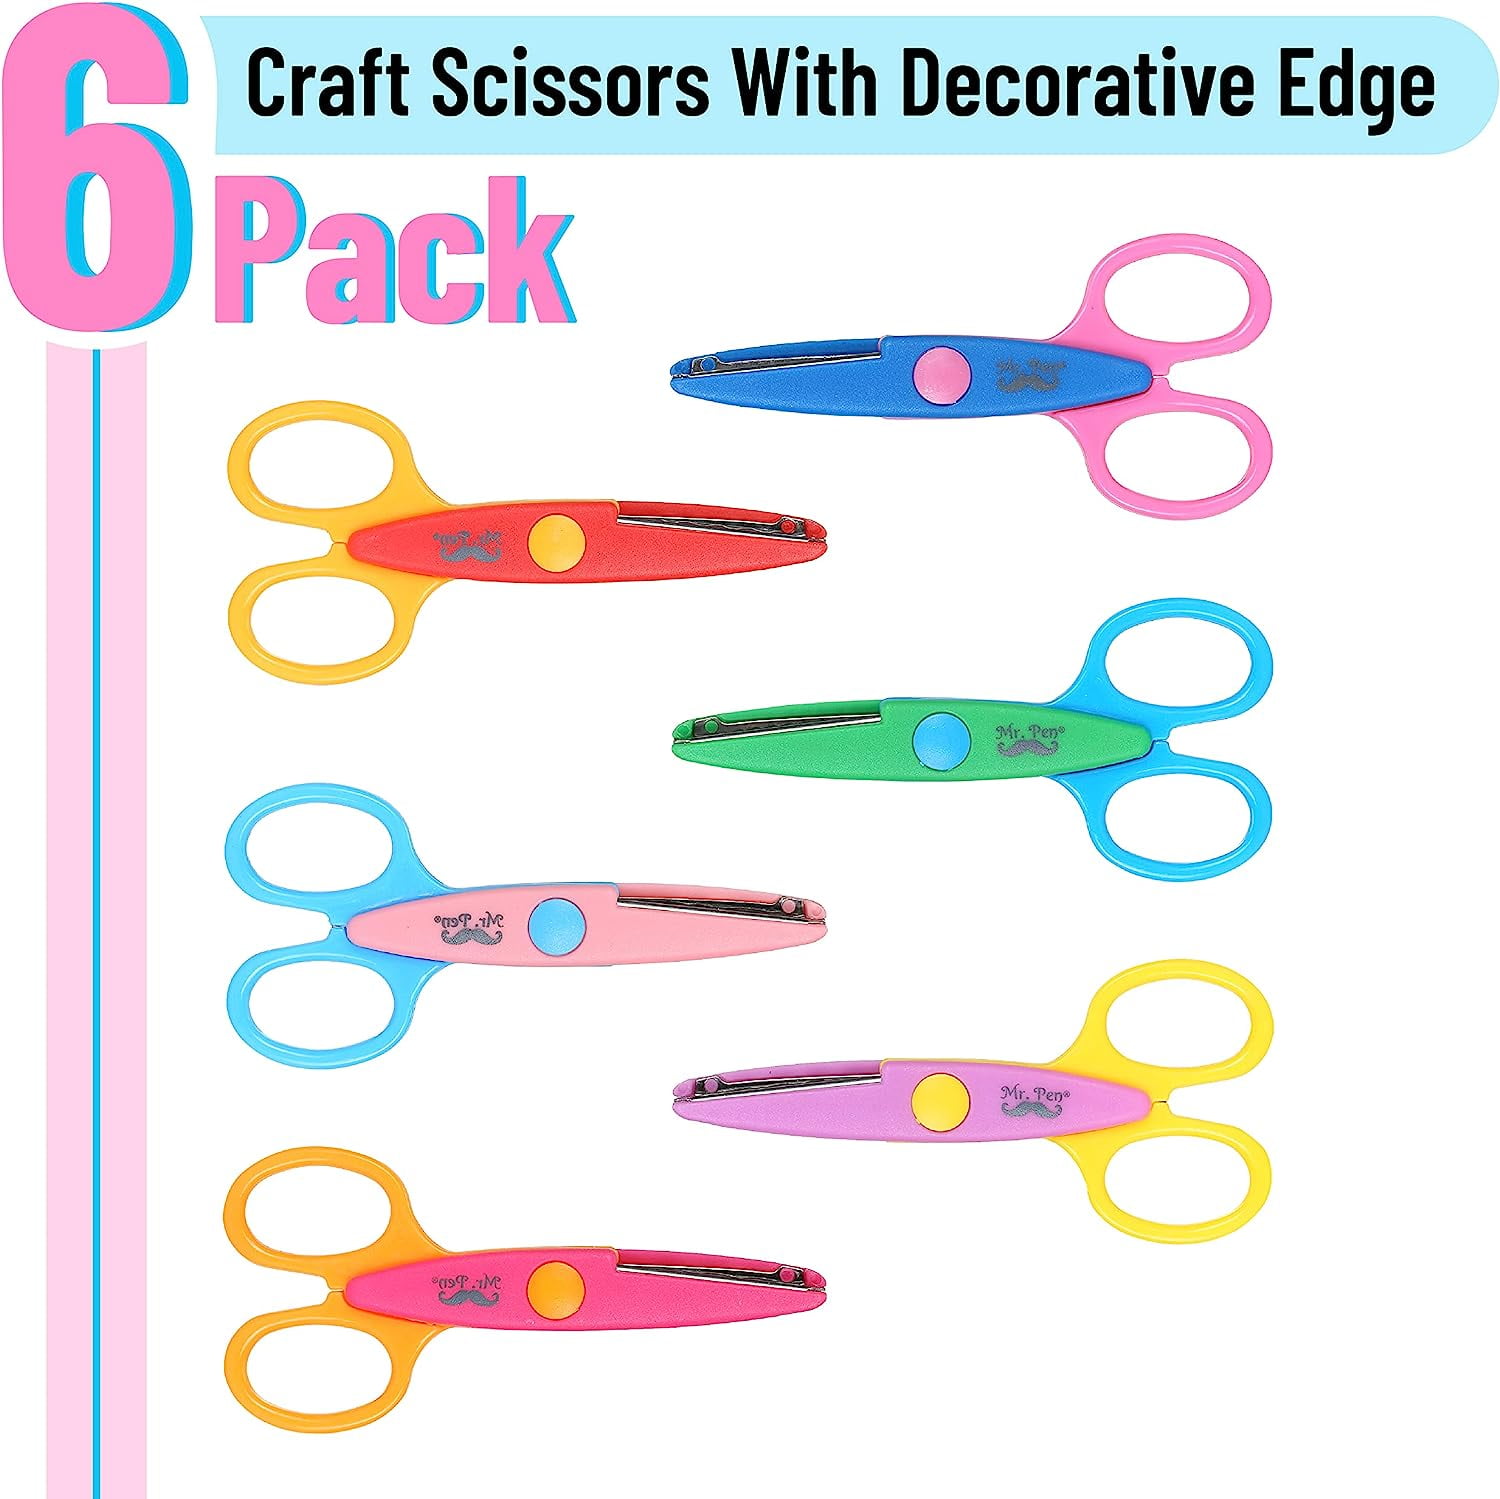 Lot of 6 Colorful Decorative Edge Craft Scissors for DIY projects,  scrapbooking